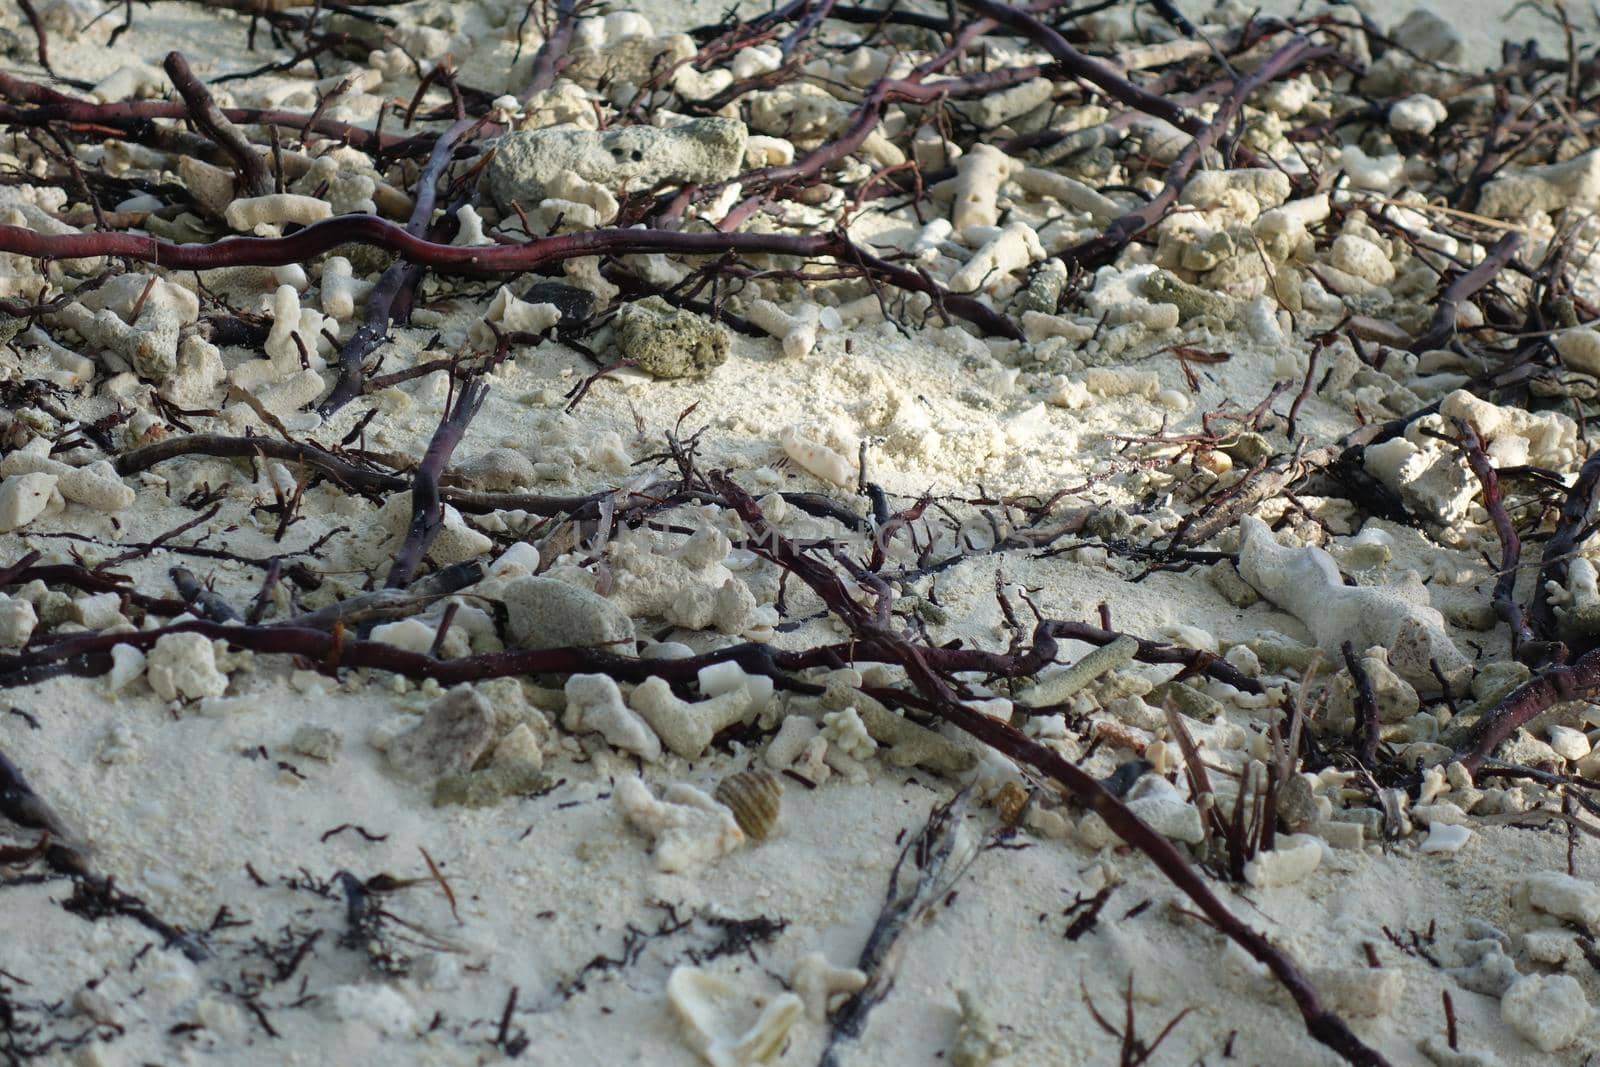 Corrals wood and seaweeds on the beach as a close up by Luise123